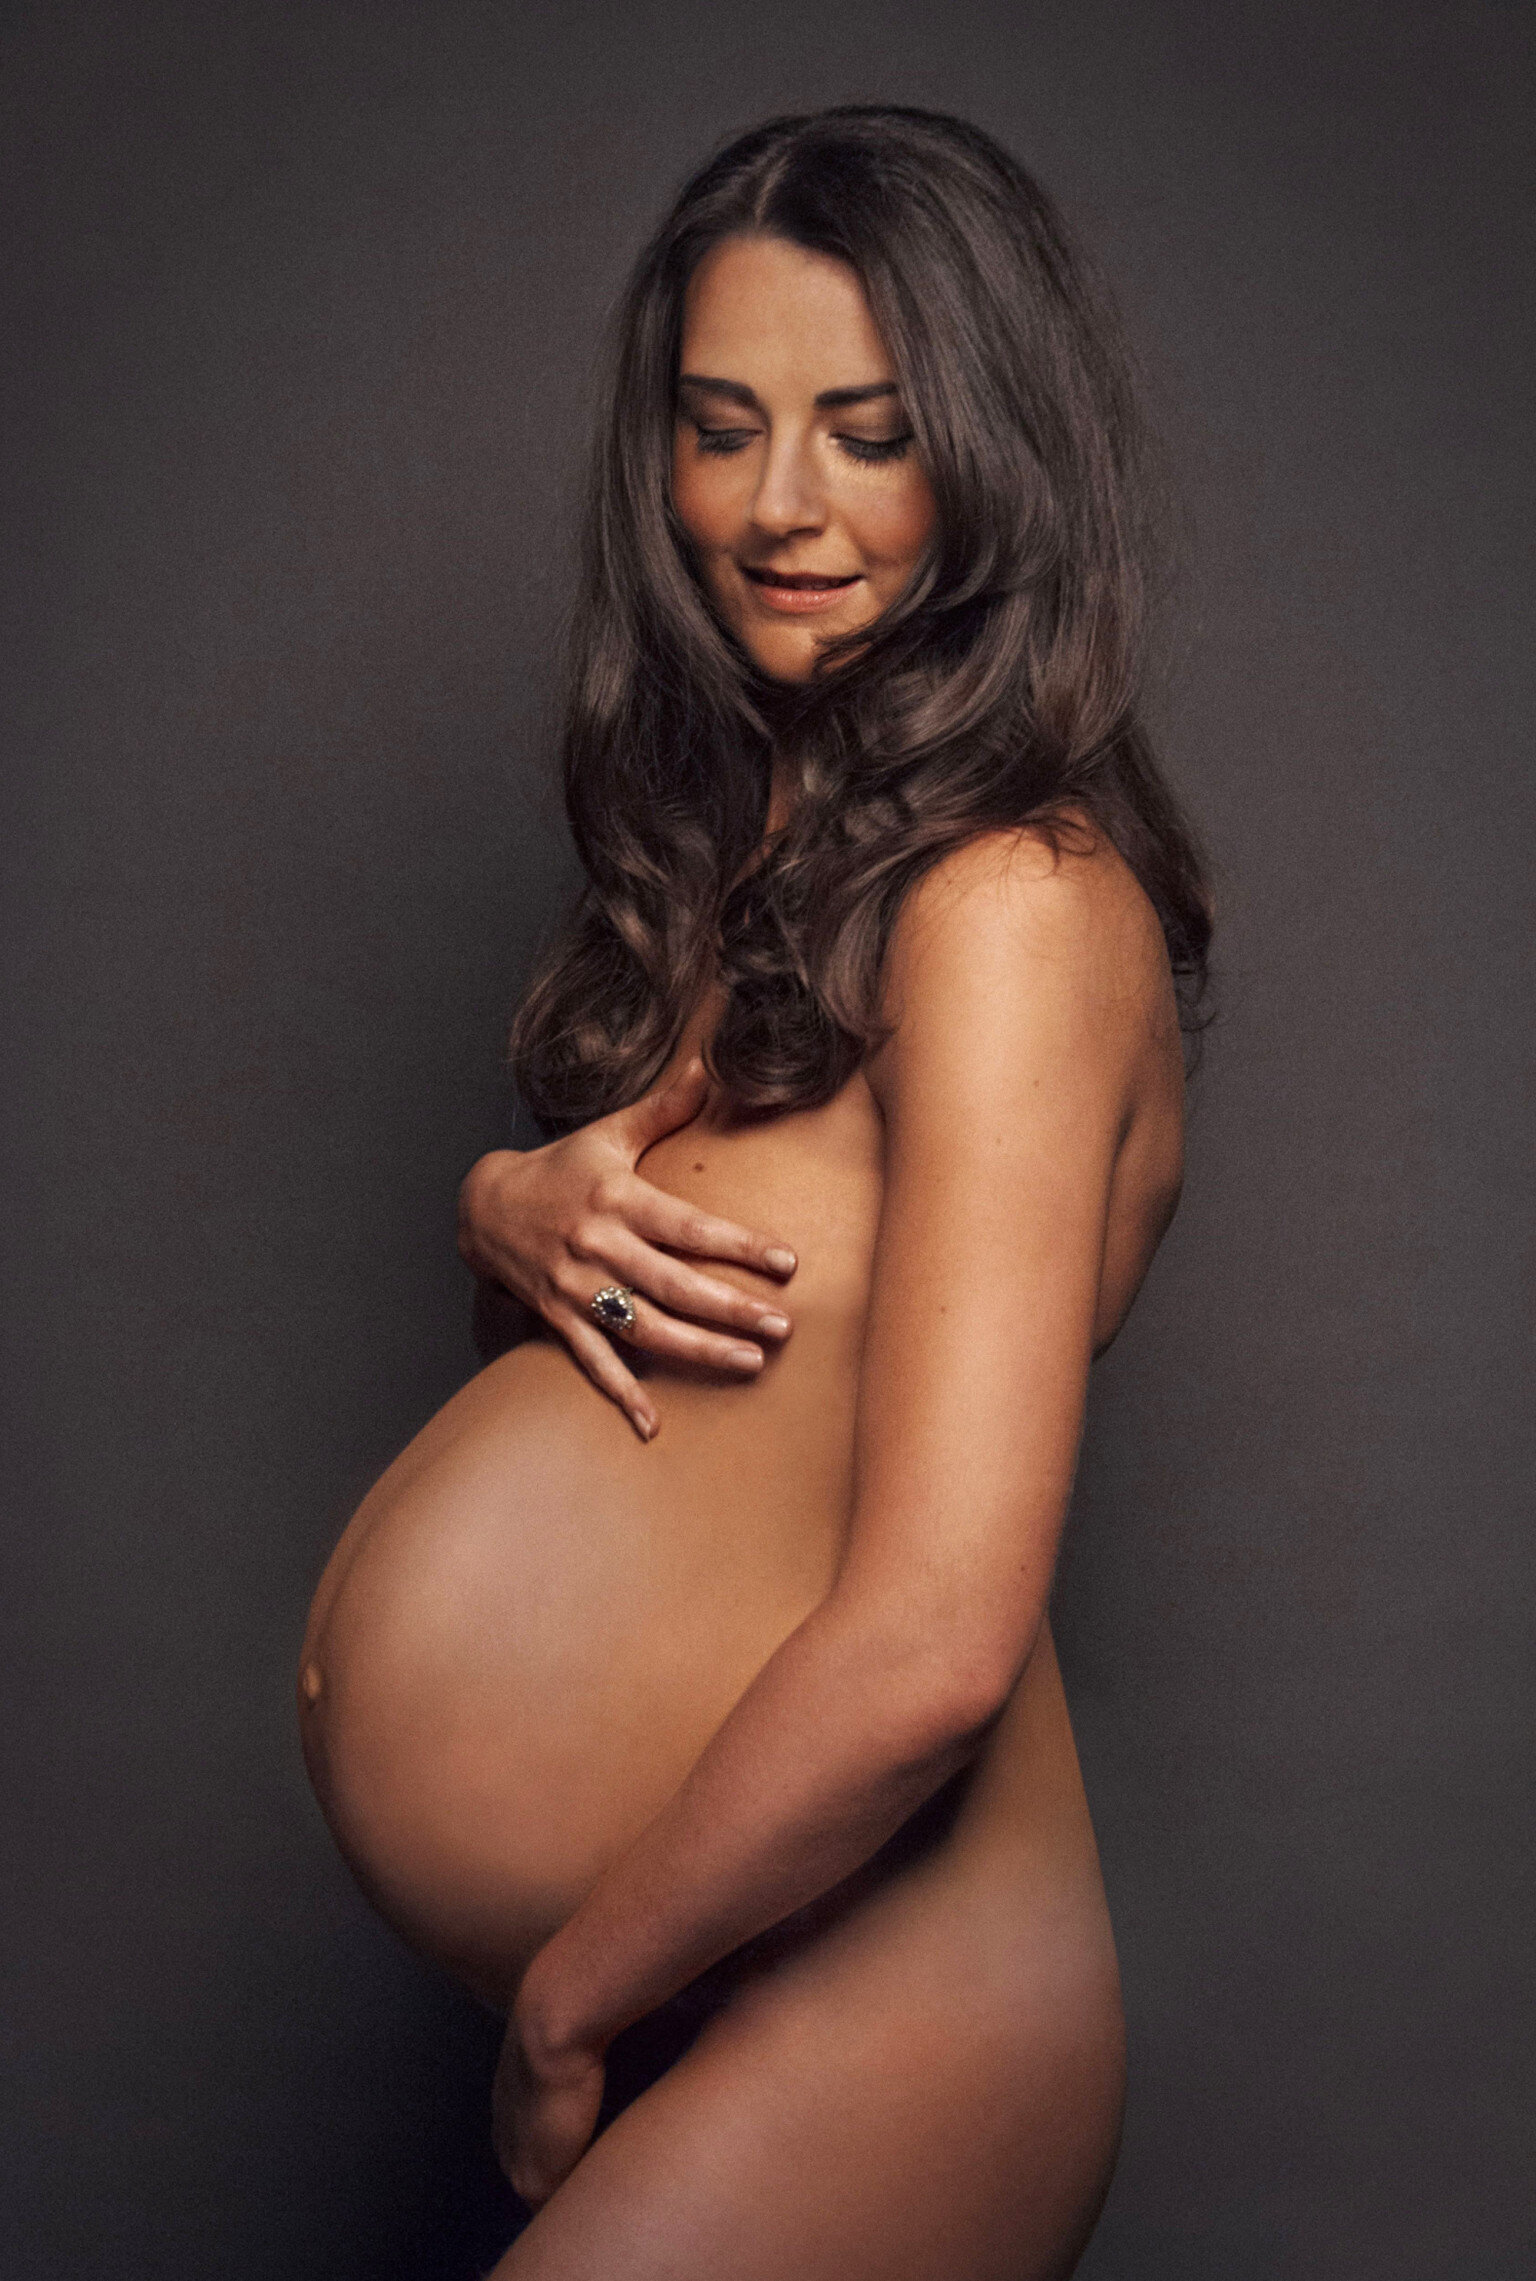 Kate Middleton Naked In Pregnant Vanity Fair Photo Shoot? Alison Jackson Reveals Latest Creation Ahead Of Royal Baby (PICTURES) HuffPost UK News